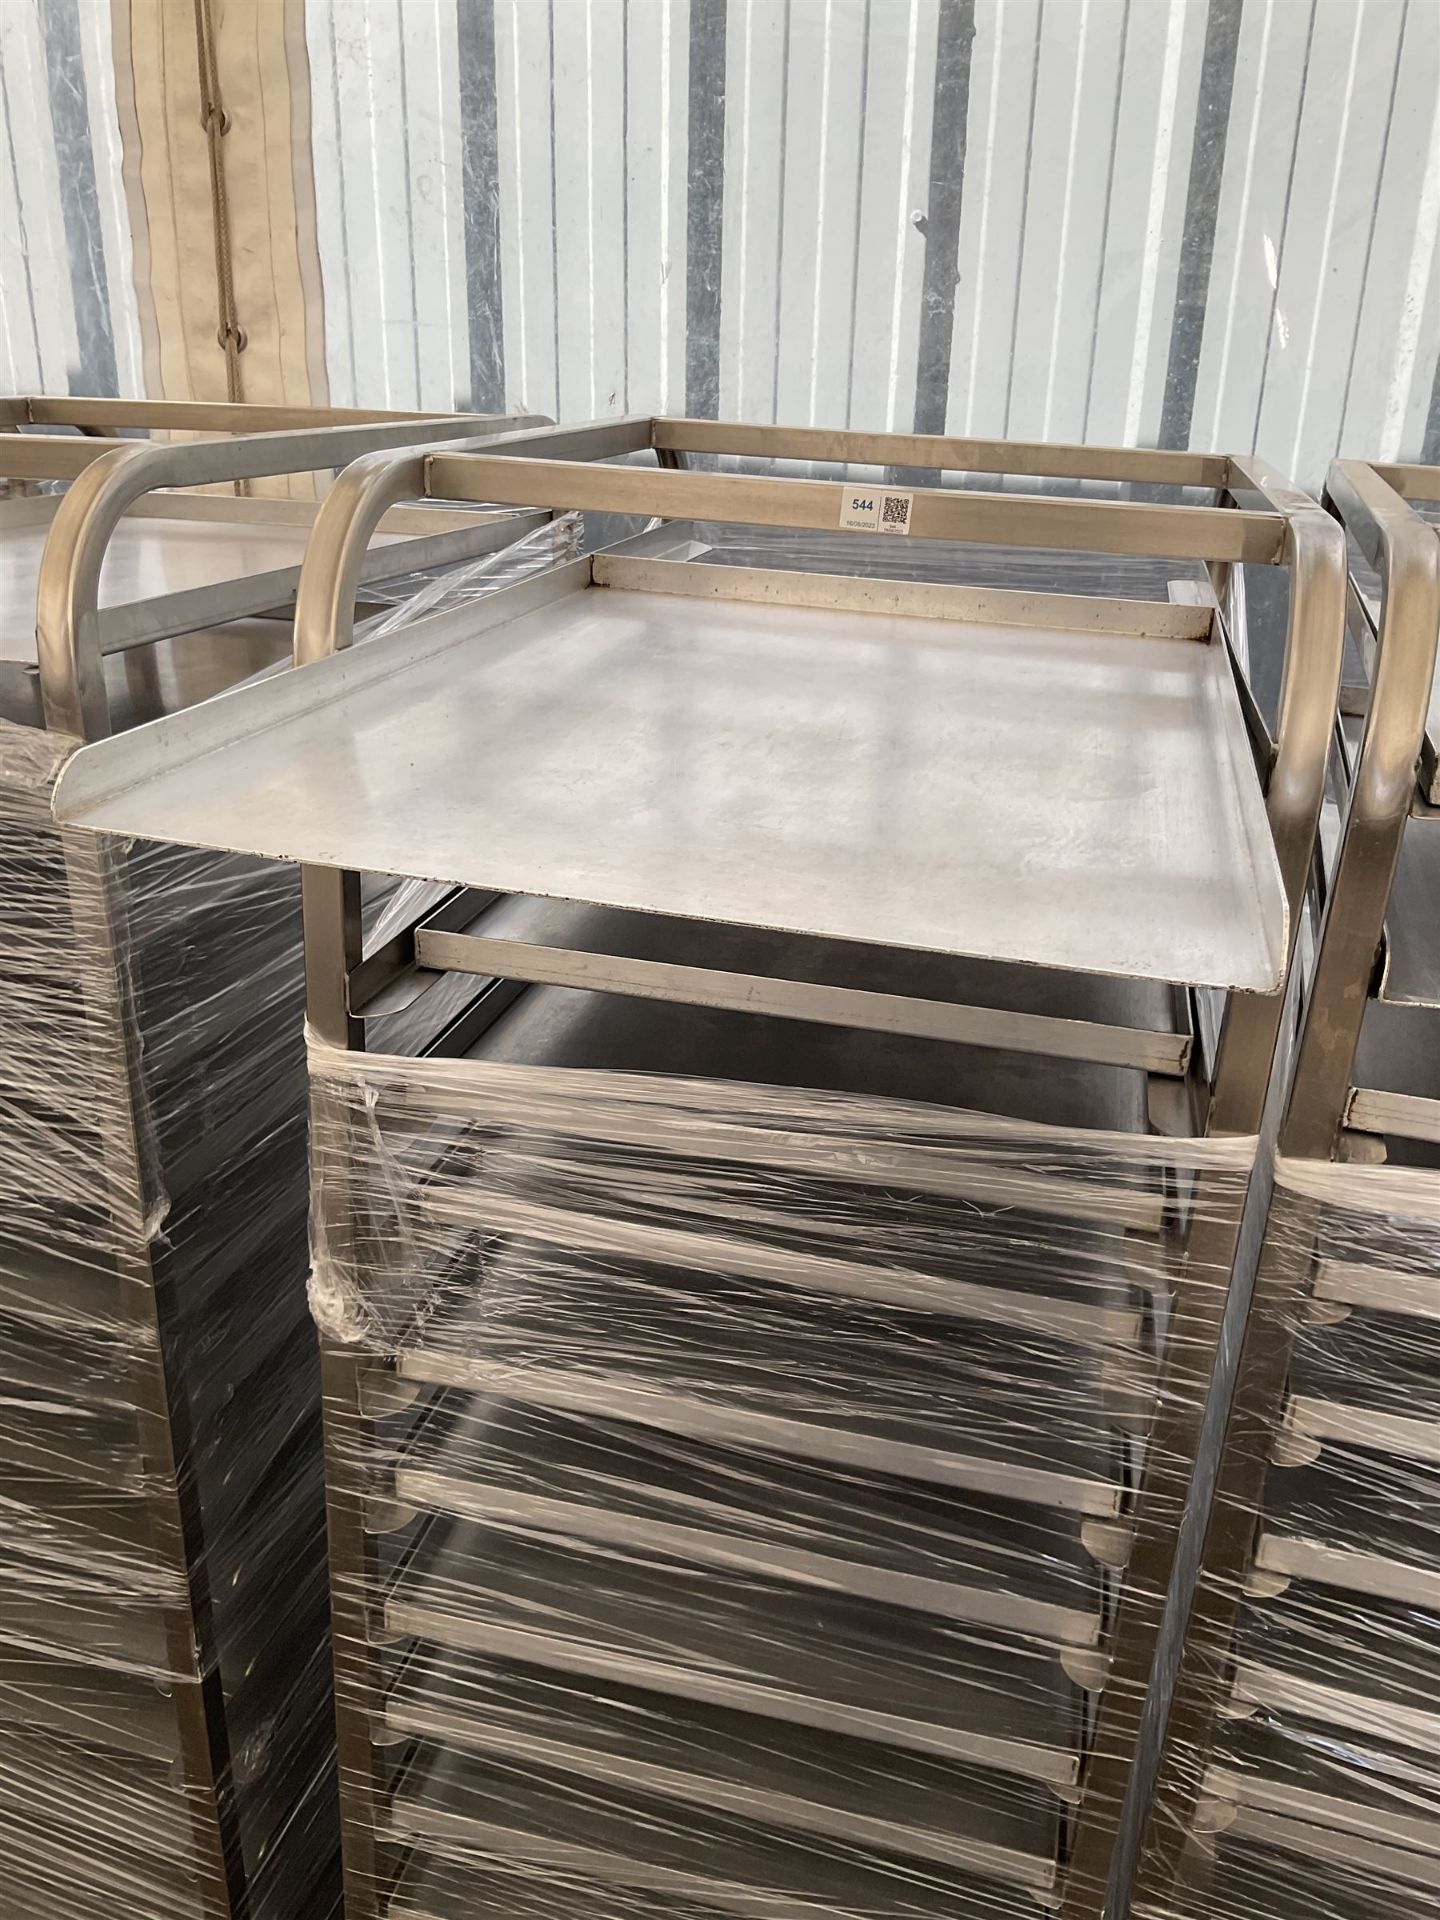 Stainless steel commercial tray rack trolley - Image 3 of 3